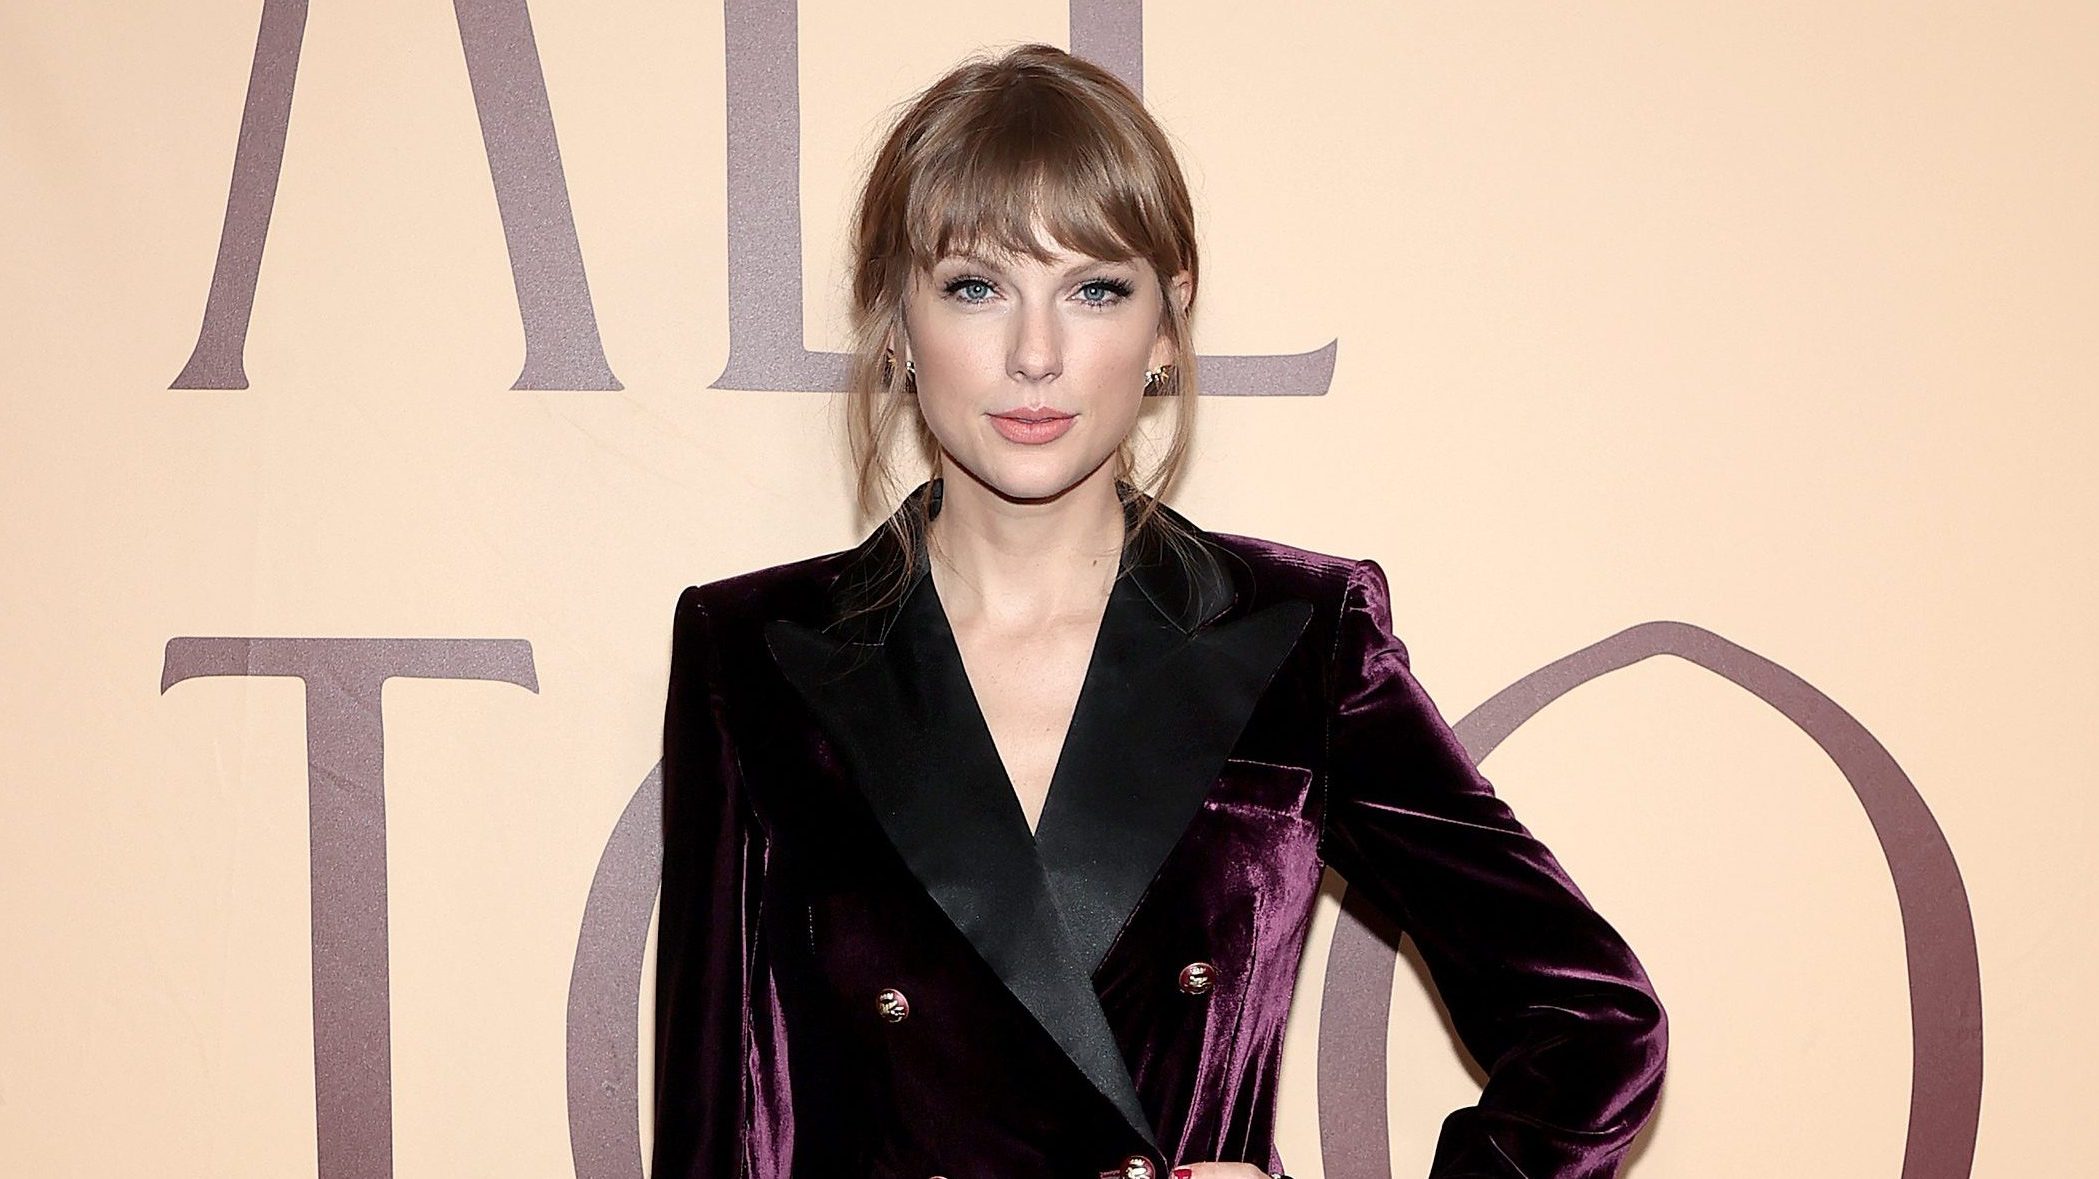 How to pre-order Taylor Swift's new album, 'Midnights